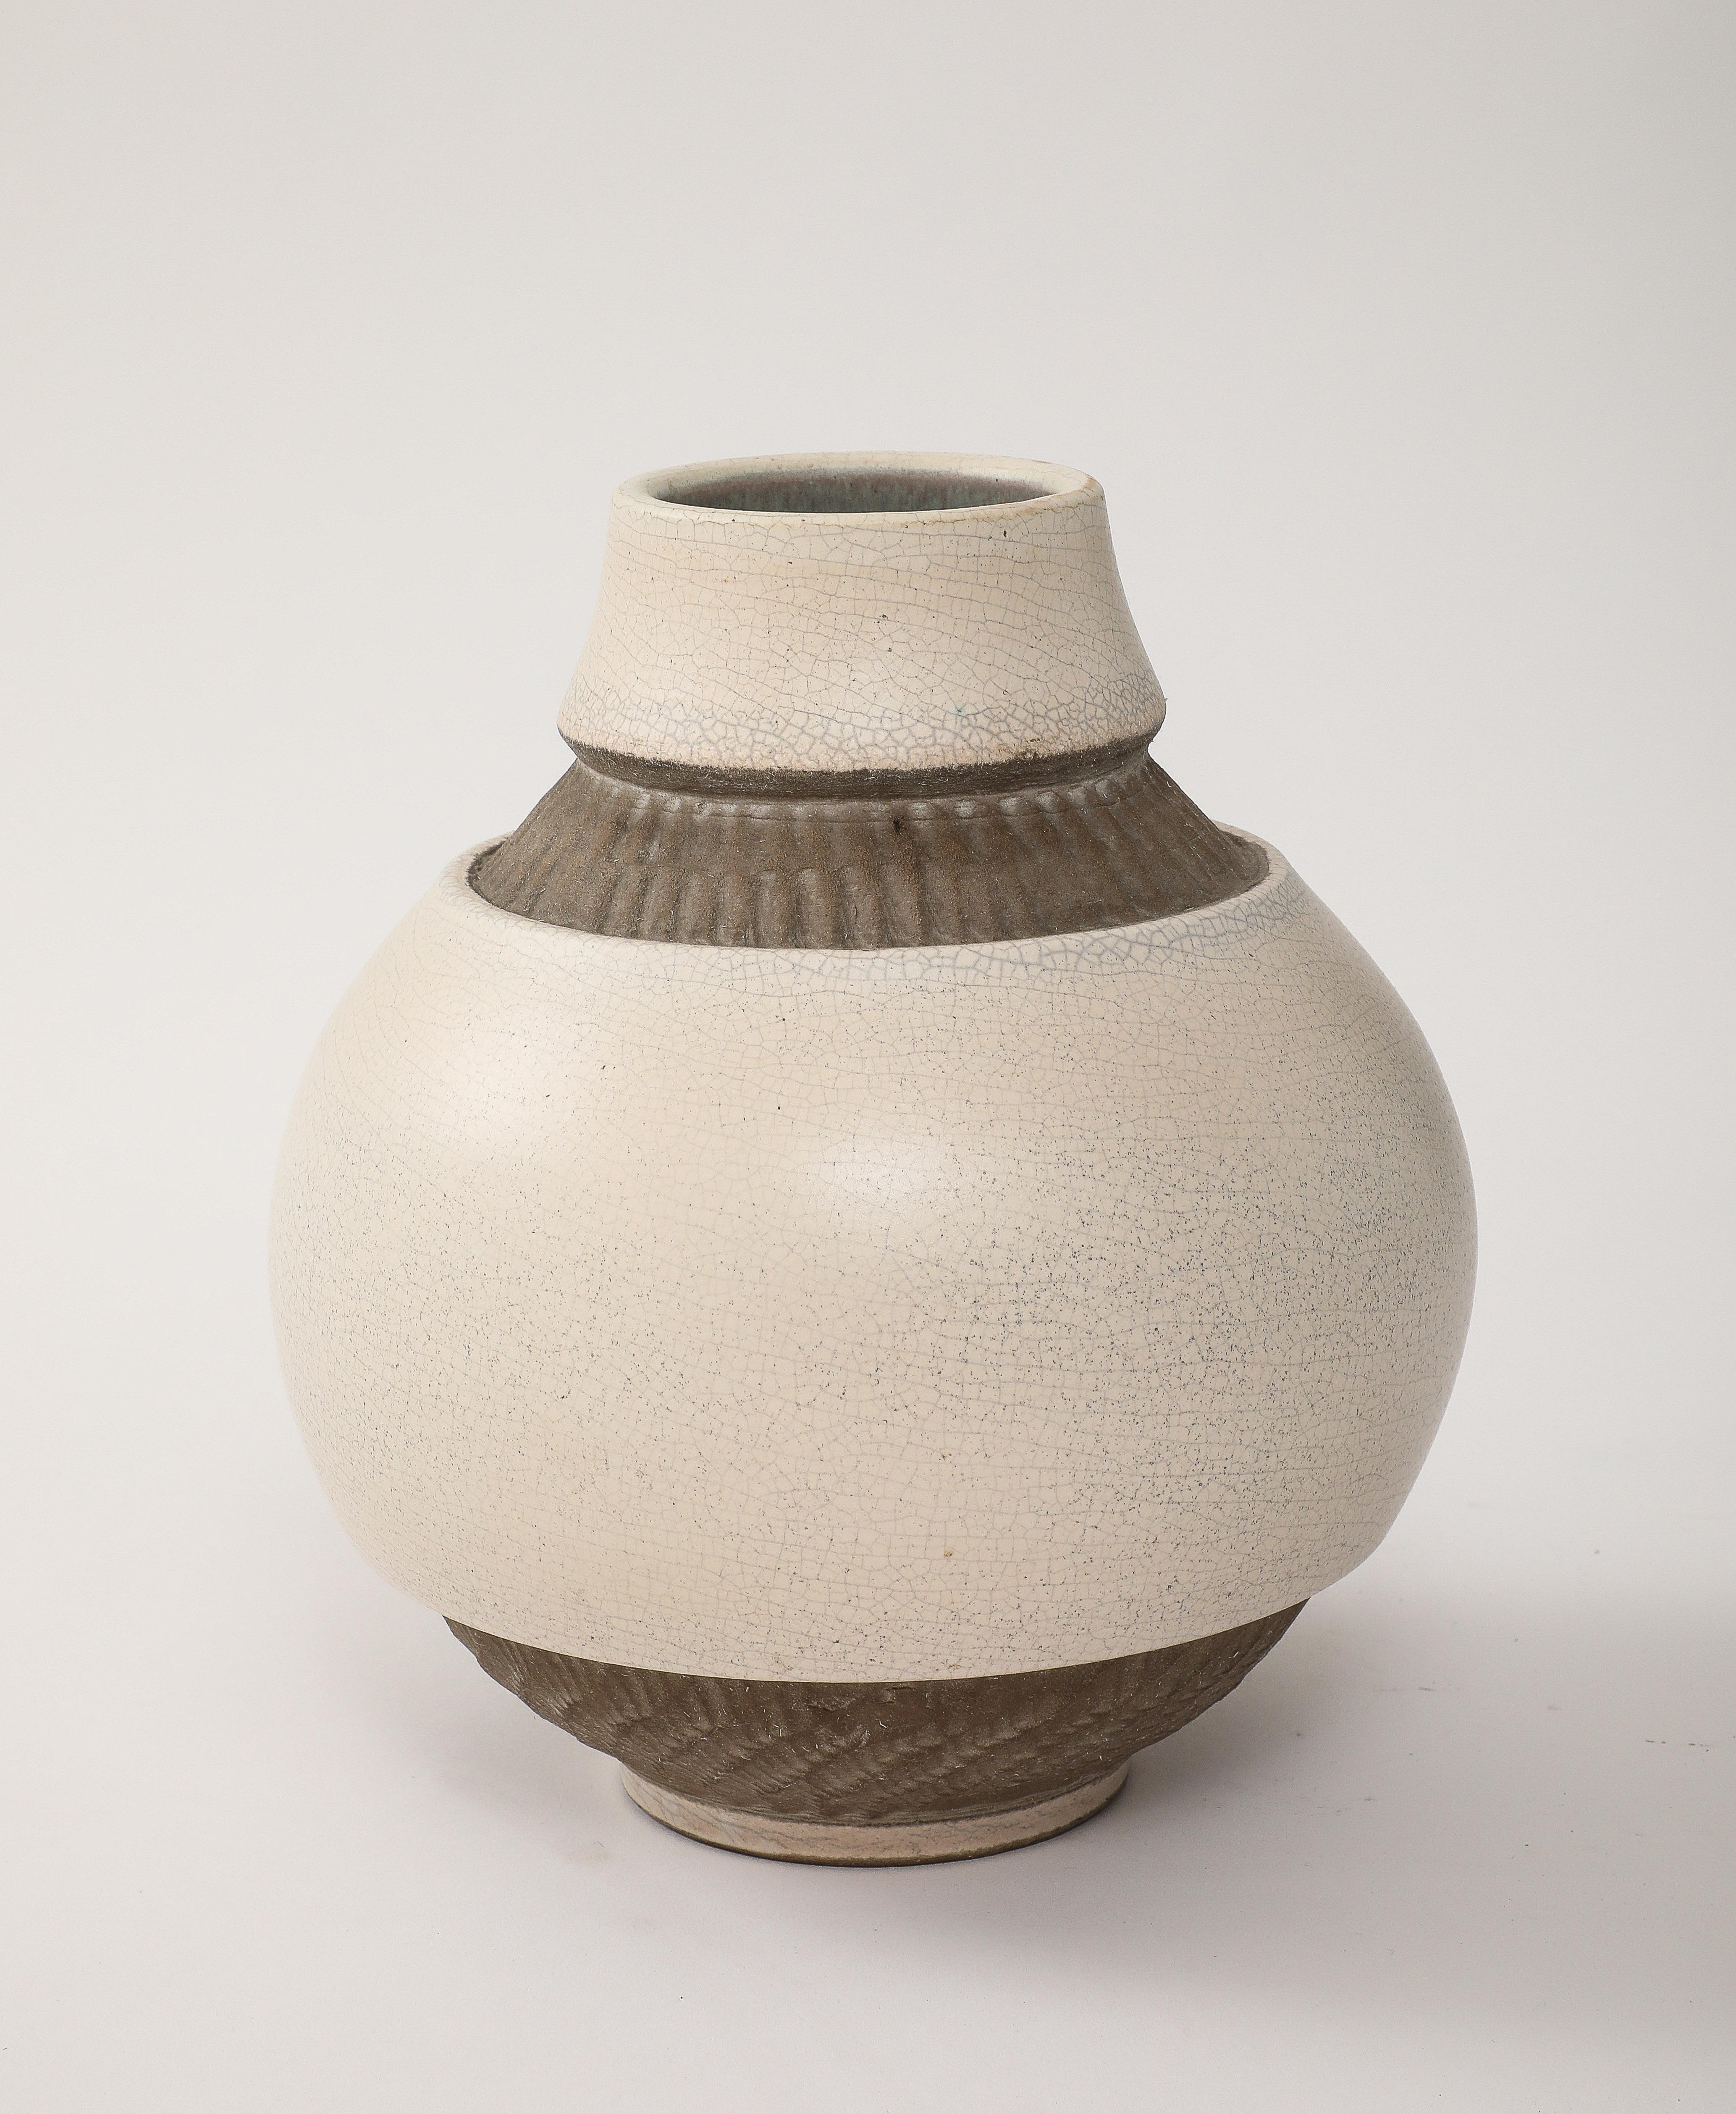 Pol Chambost Off-White Crackle Vase, Brown Incised Bands, Frankreich, 1940, signiert im Zustand „Gut“ im Angebot in Brooklyn, NY